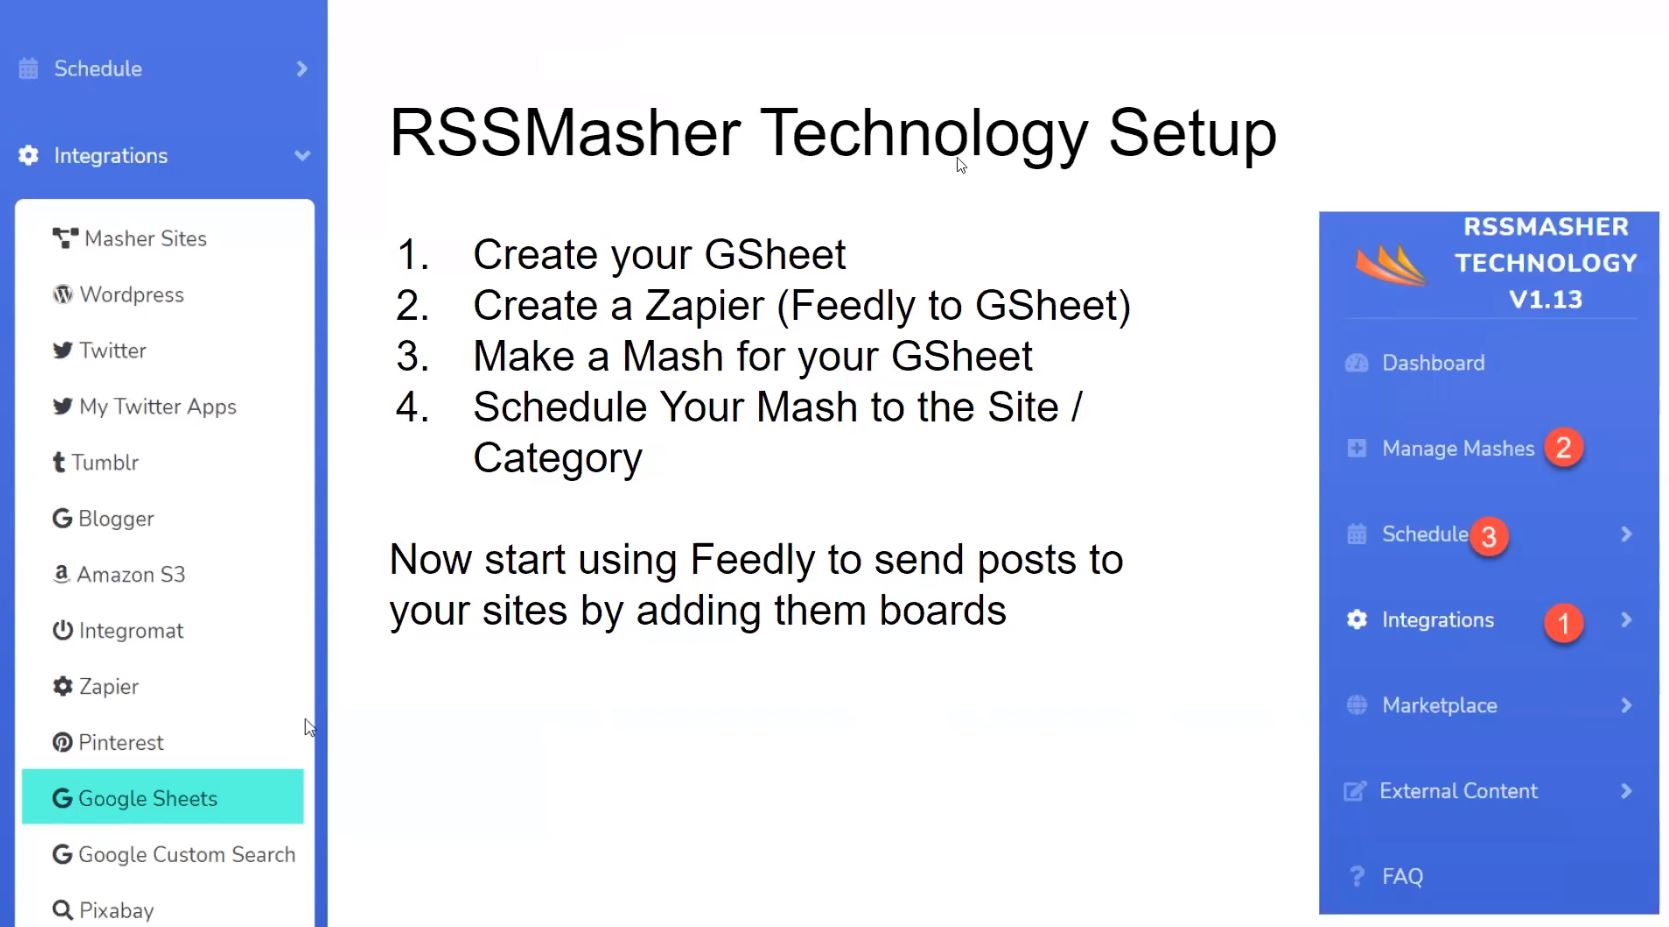 image of the process flow steps for getting content from Feedly to RSSMasher